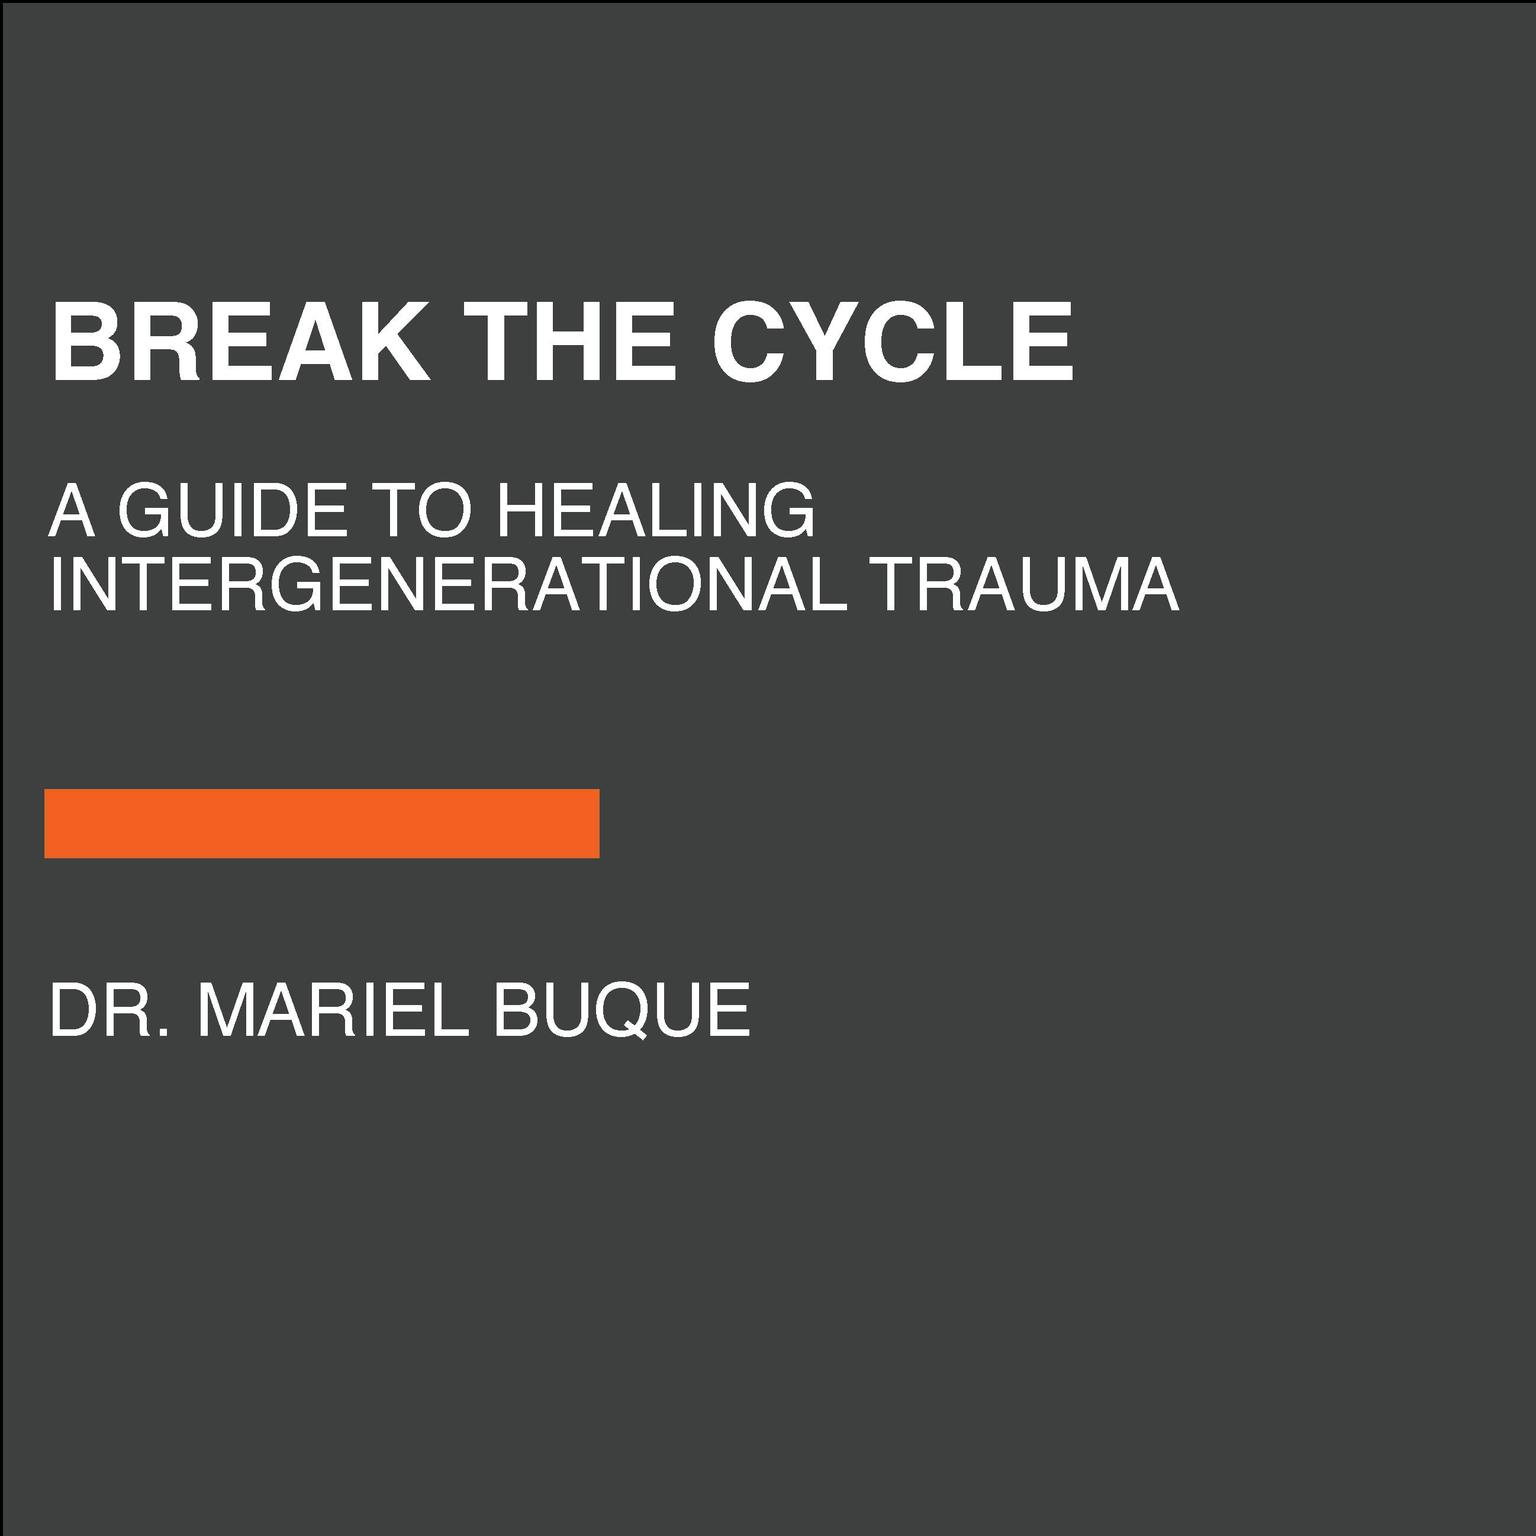 Break the Cycle: A Guide to Healing Intergenerational Trauma Audiobook, by Mariel Buqué